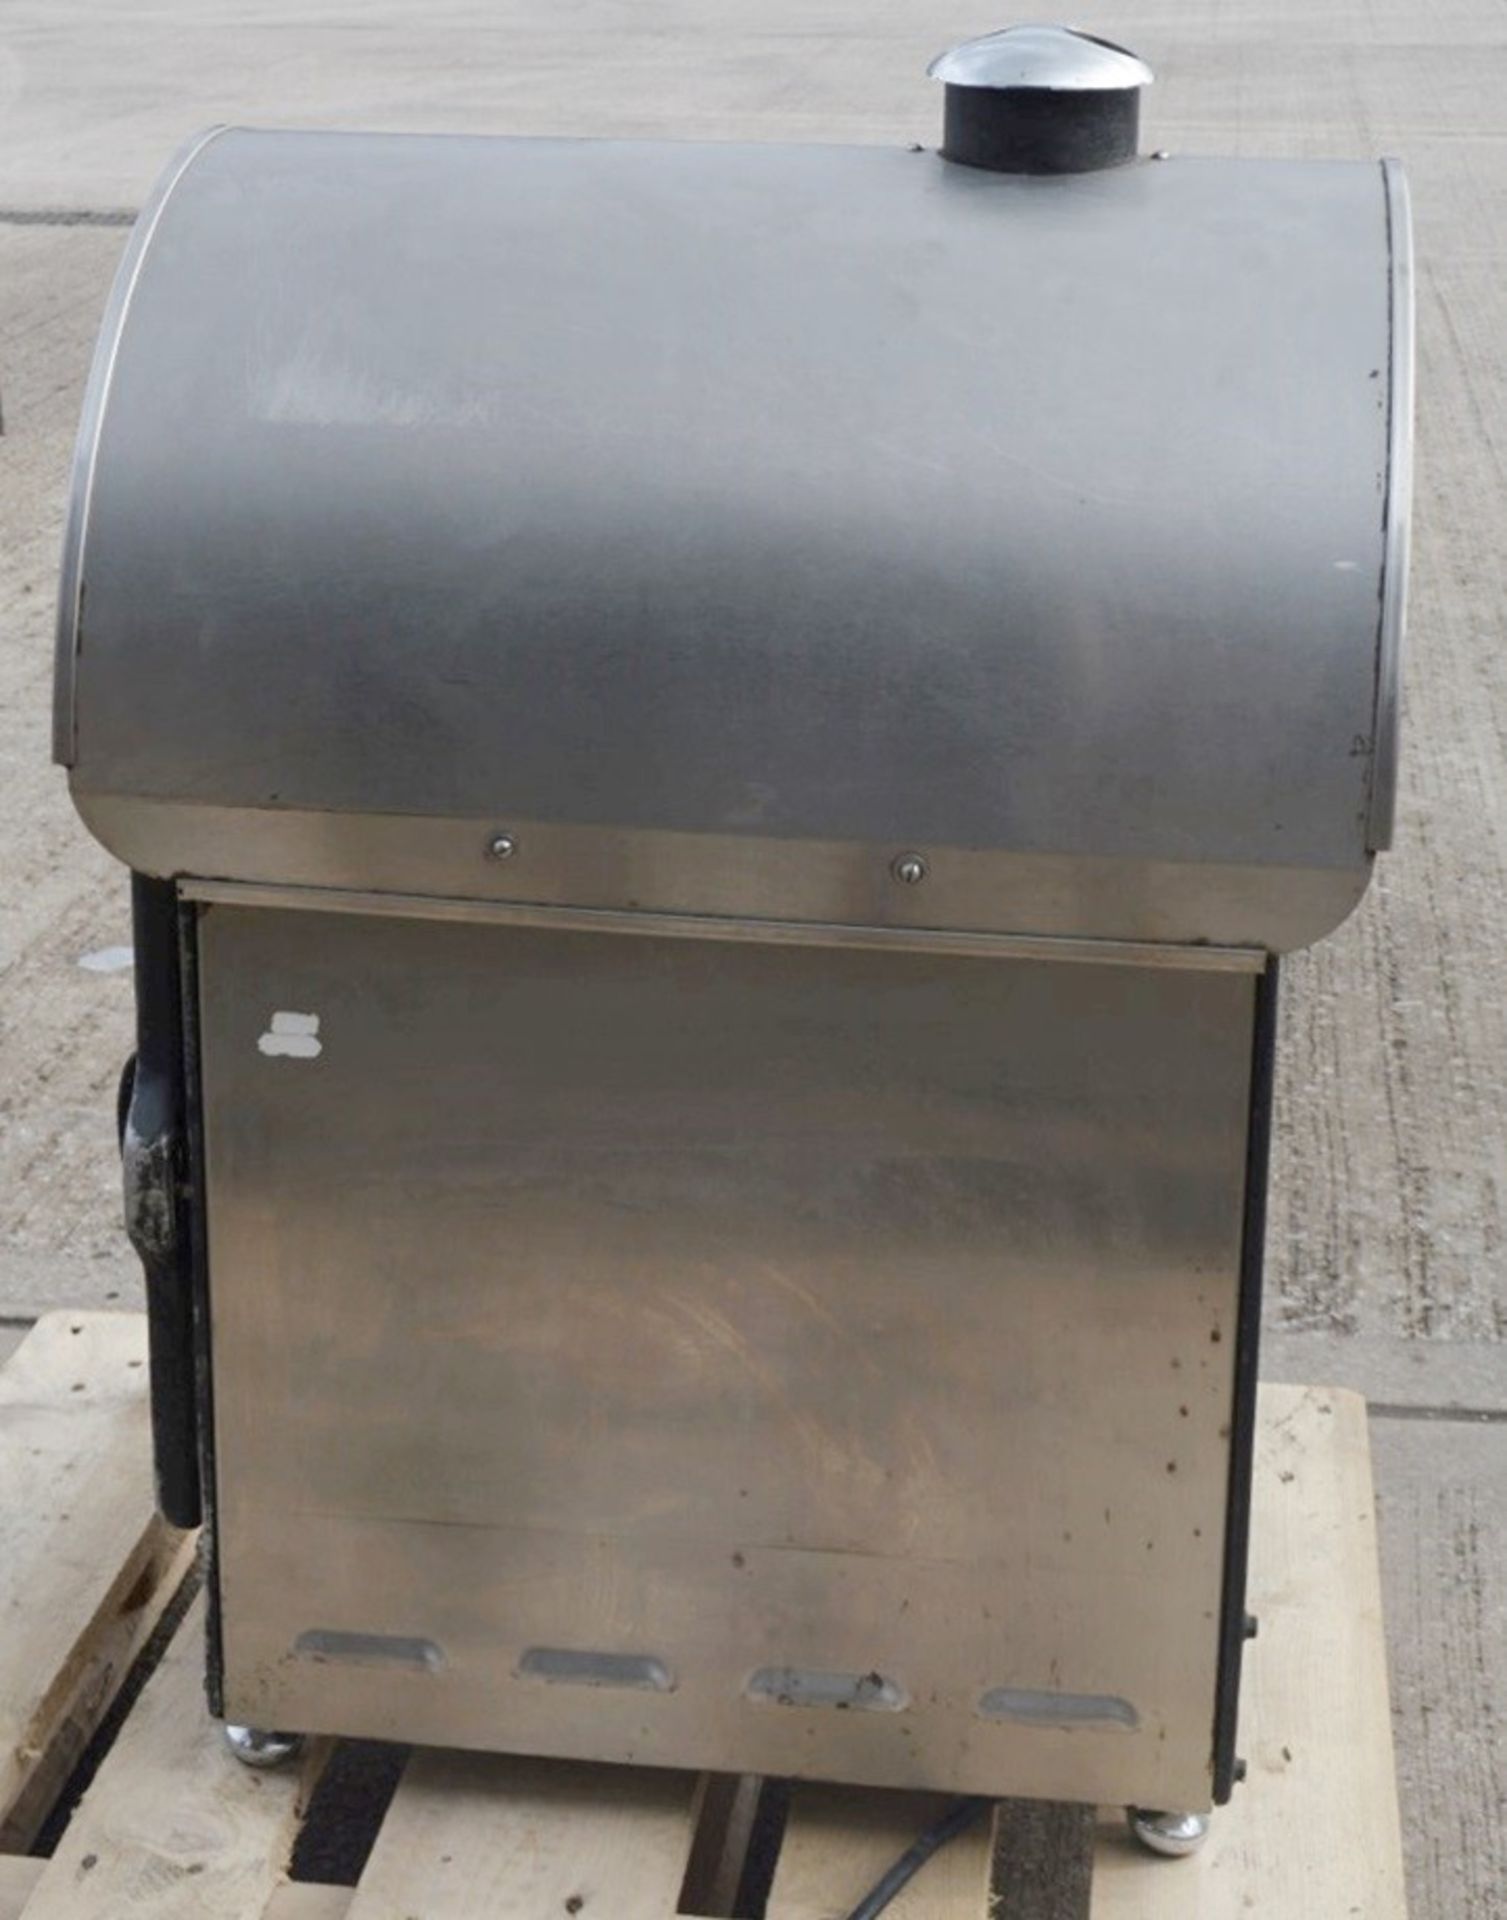 1 x King Edward Large Commercial Potato Baker In Black - Dimensions: D56 x W52 x H80cm - Preowned - Image 8 of 10